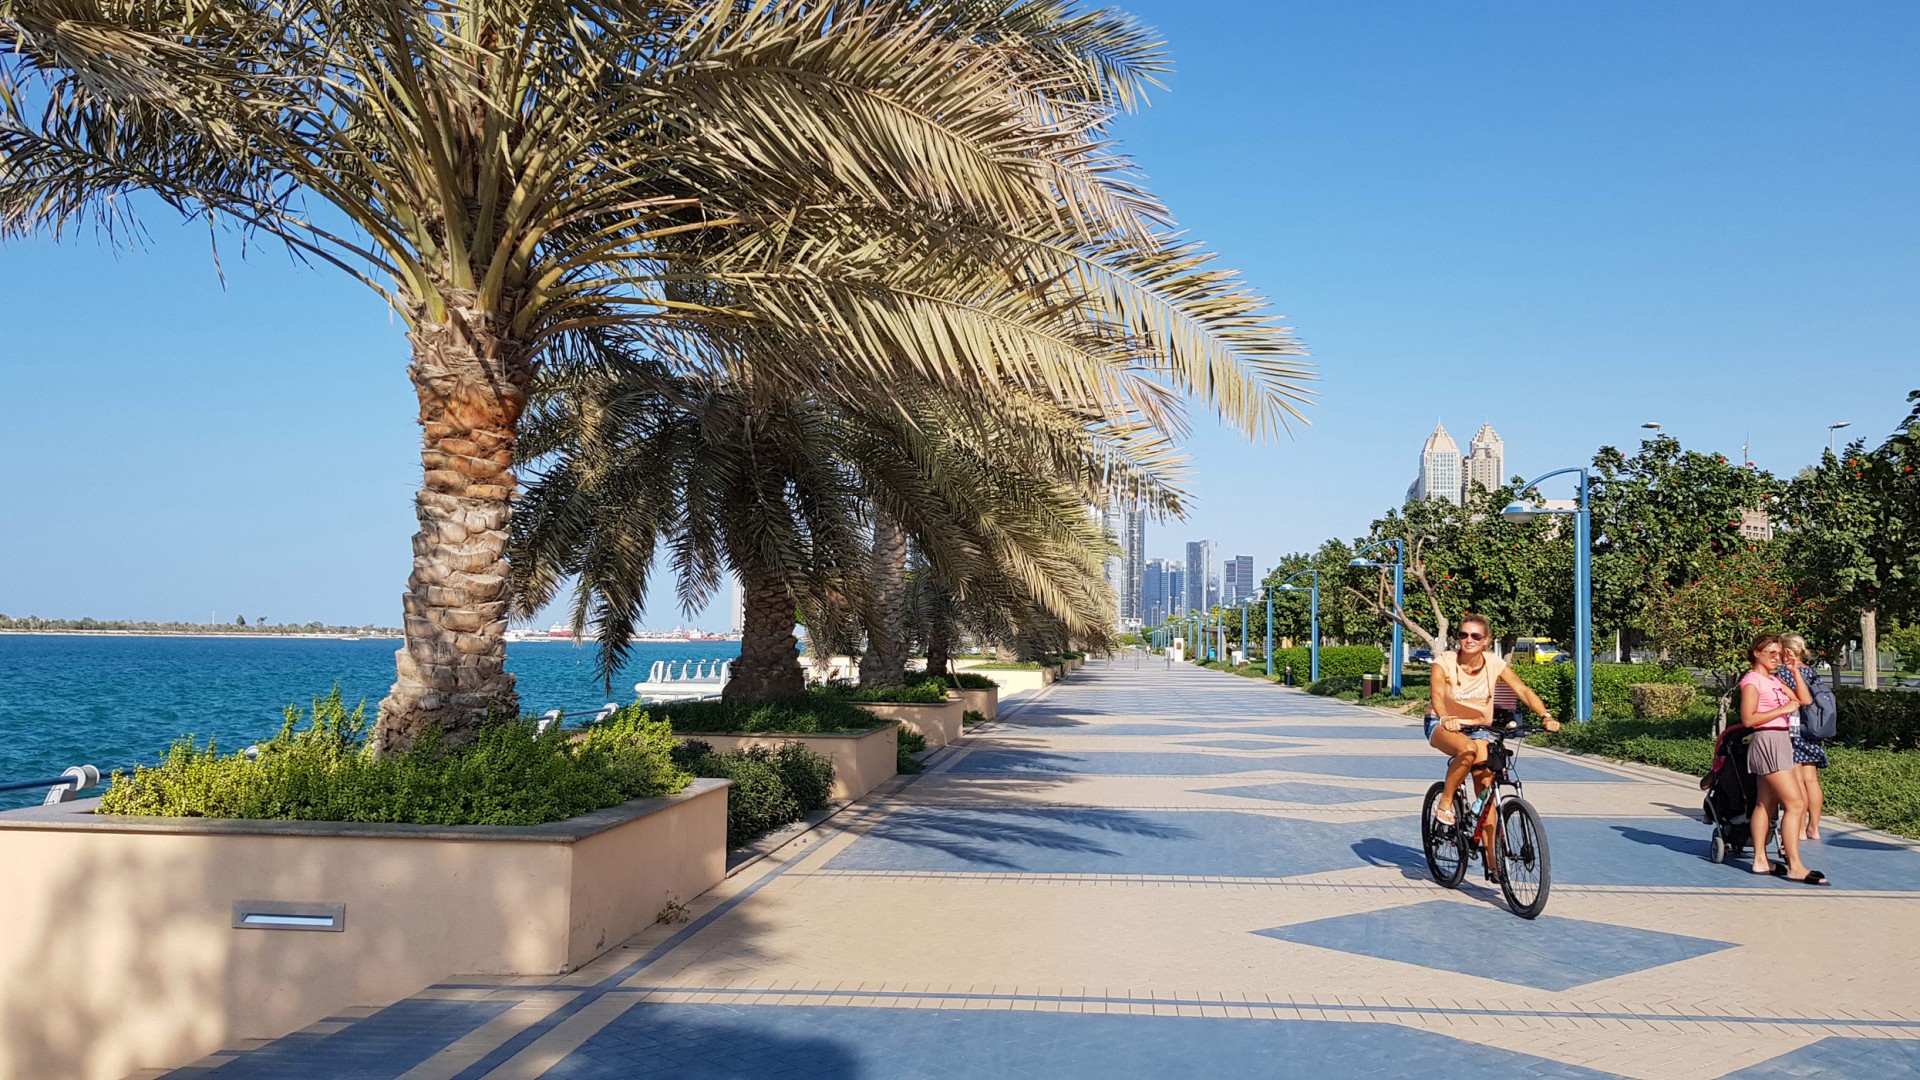 The Corniche - Best Things to do in Abu Dhabi